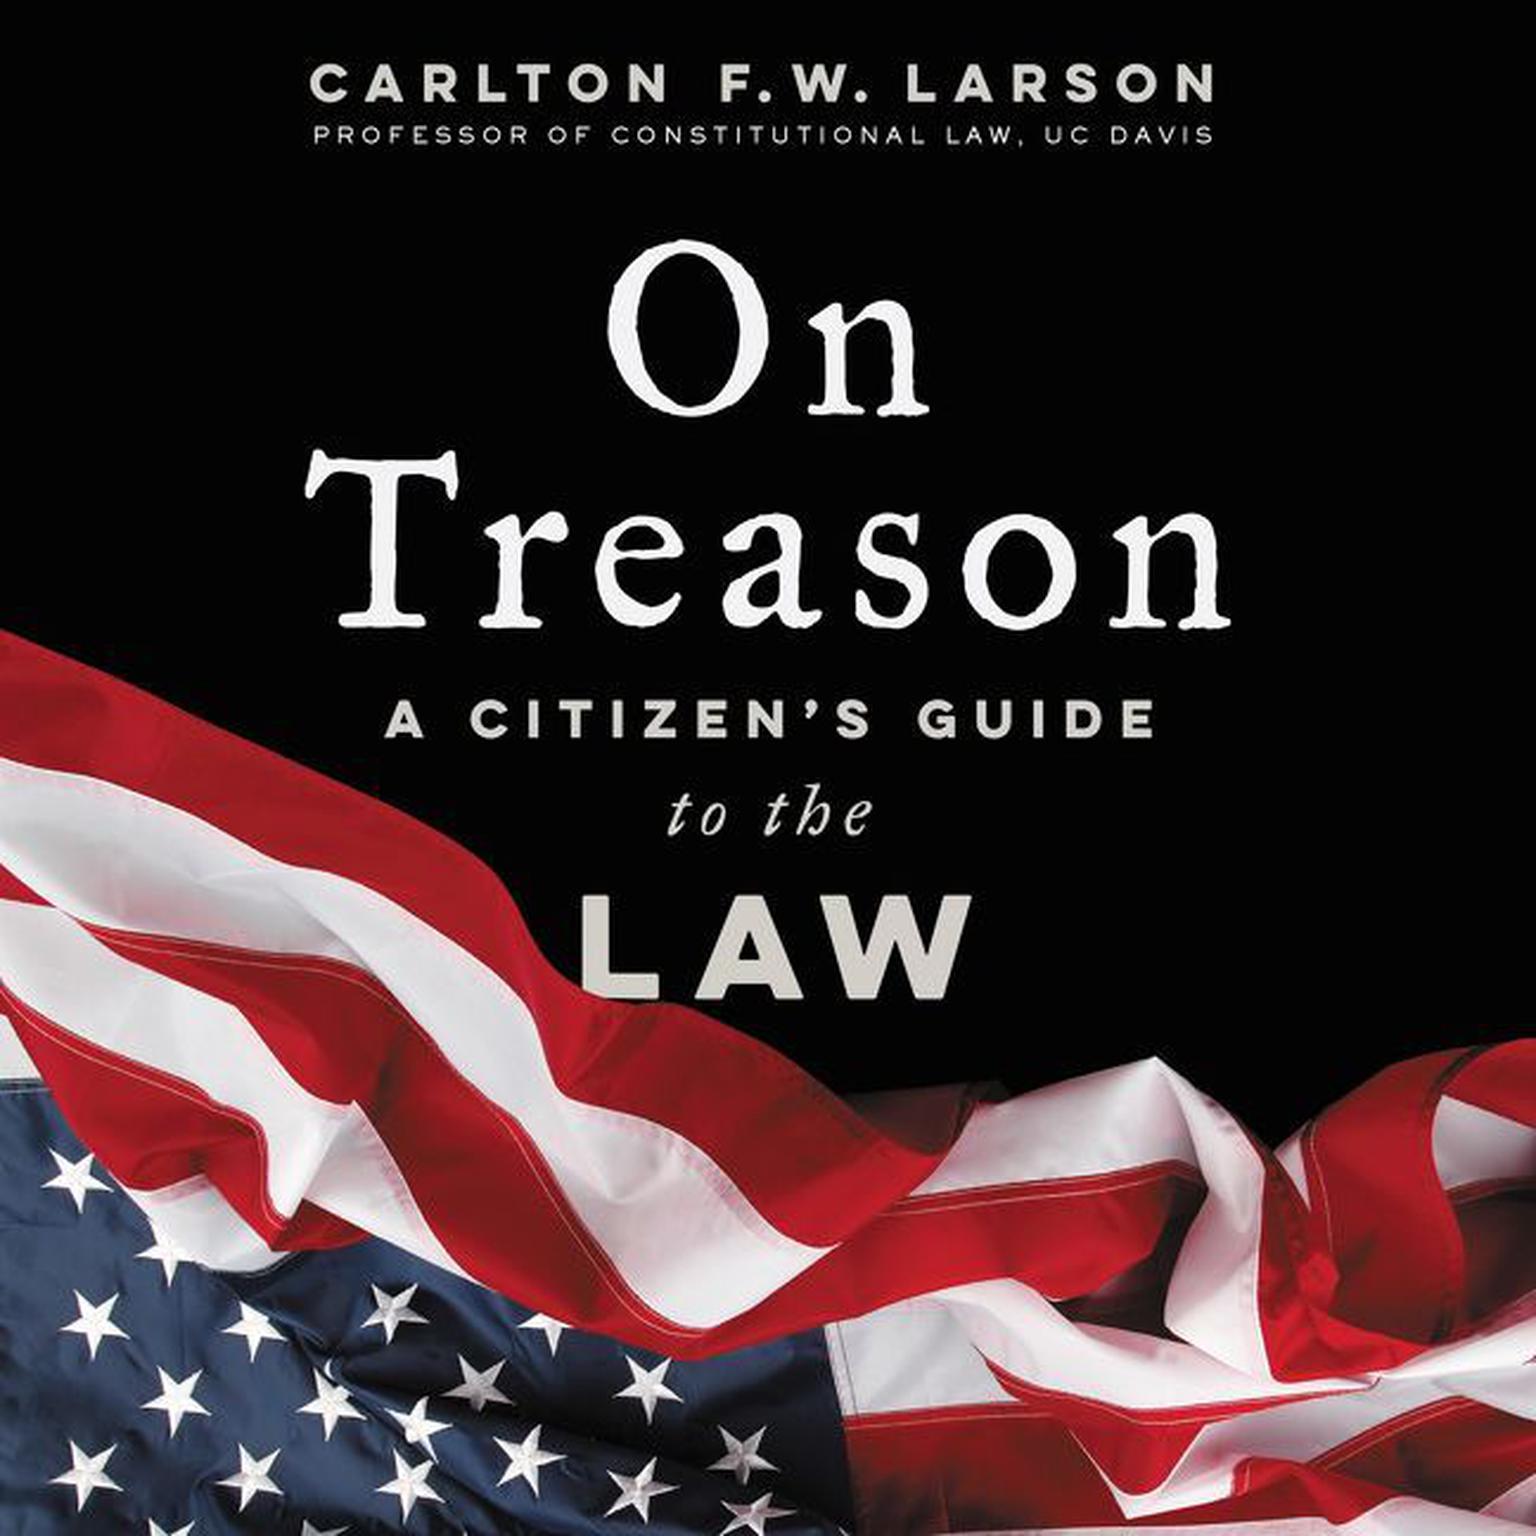 On Treason: A Citizens Guide to the Law Audiobook, by Carlton F. W. Larson